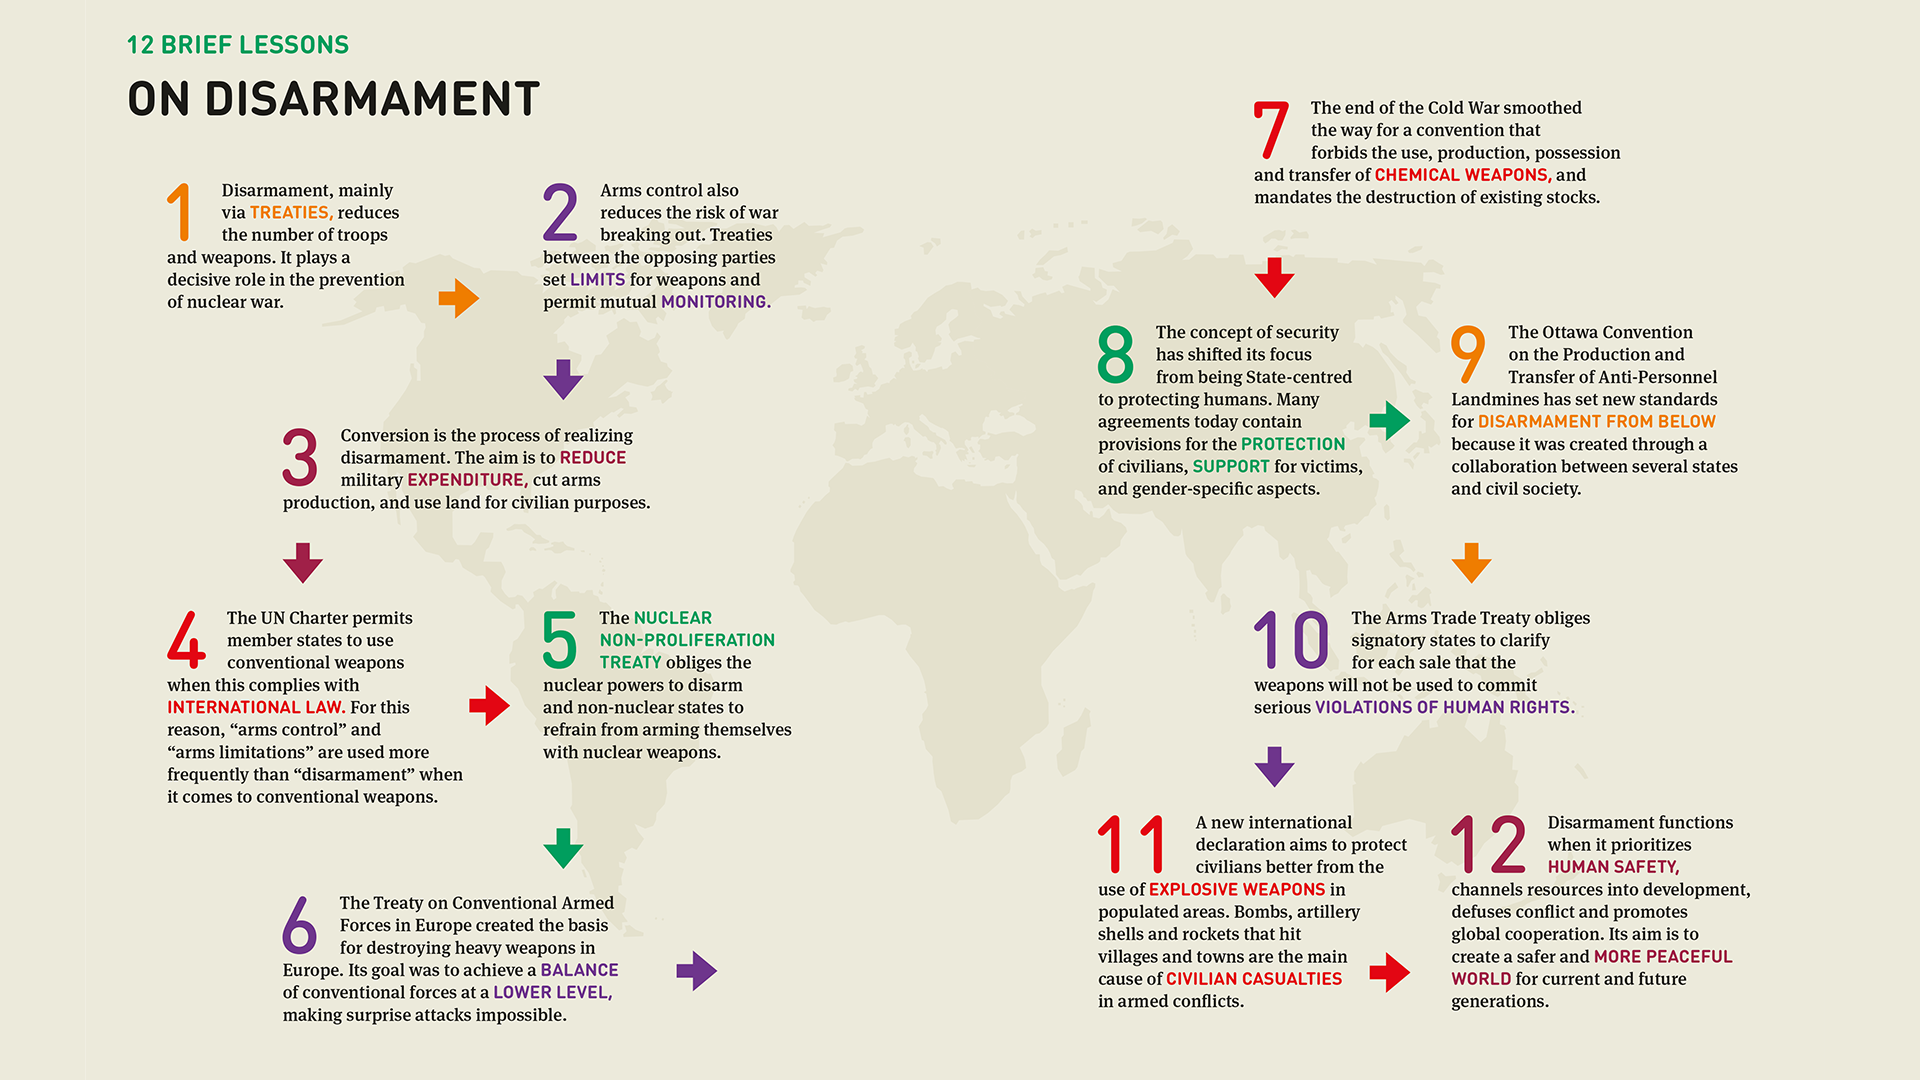 12 brief lessons on disarmament